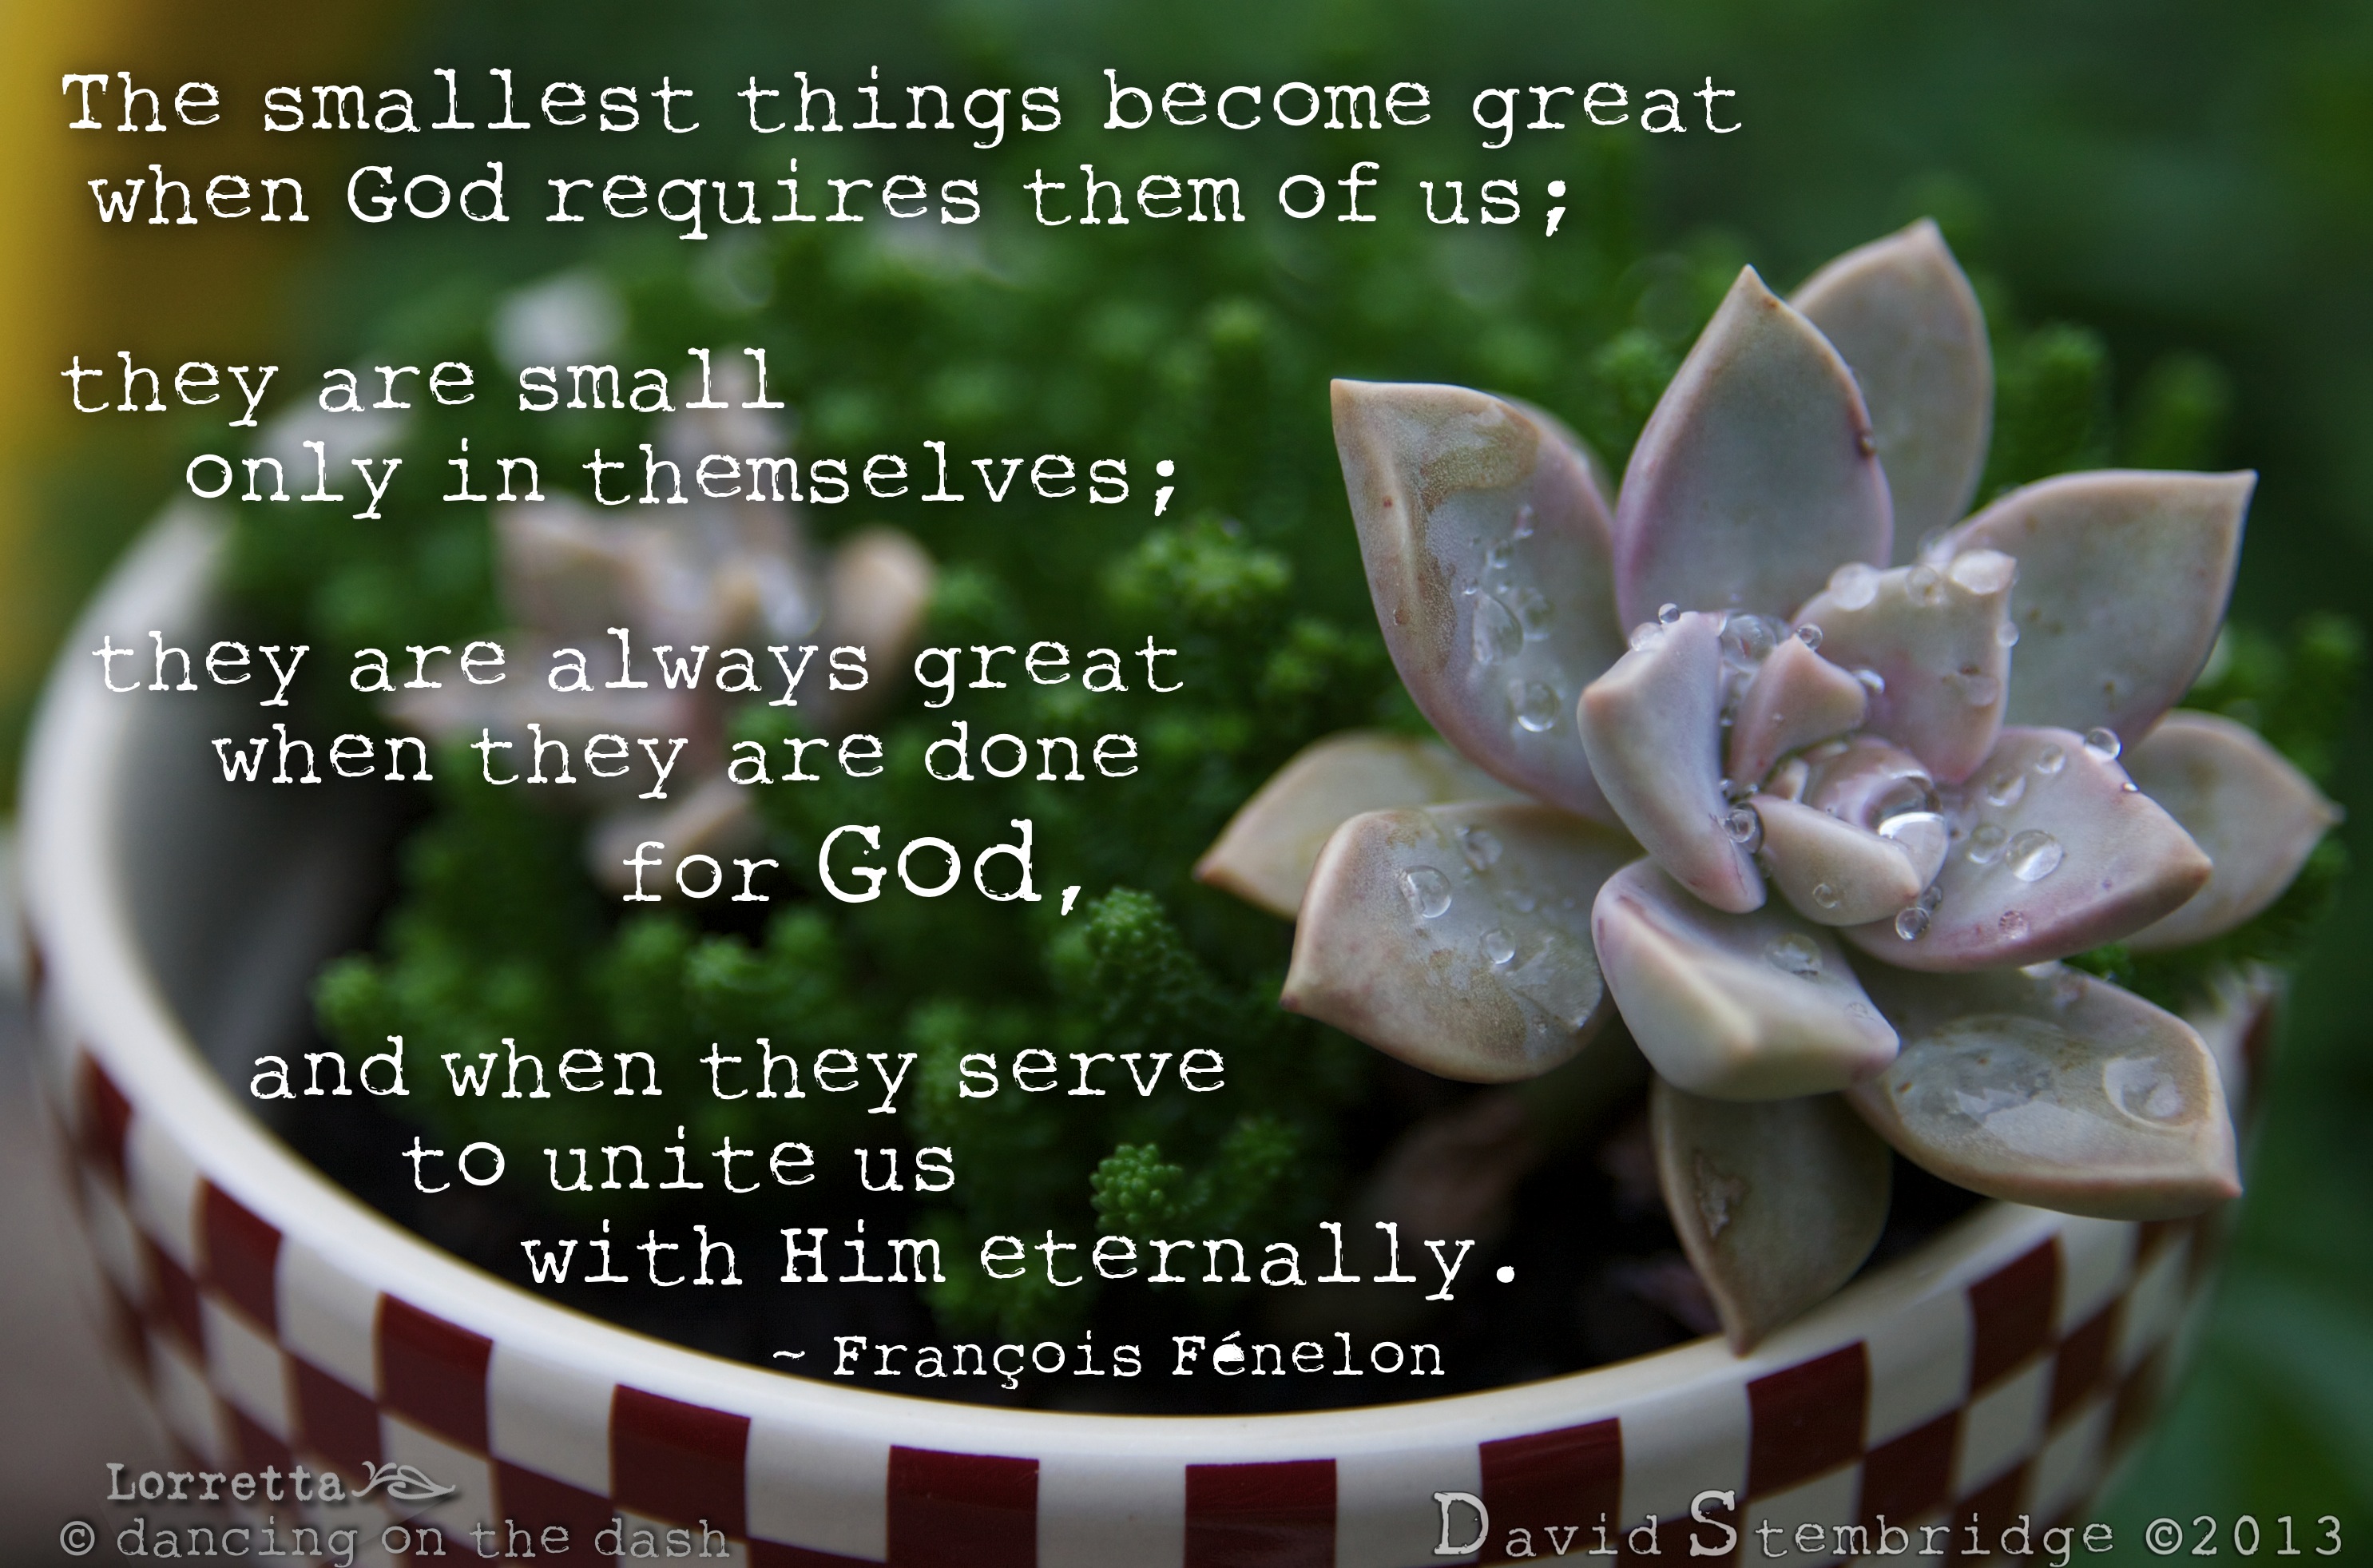 The Smallest things become great